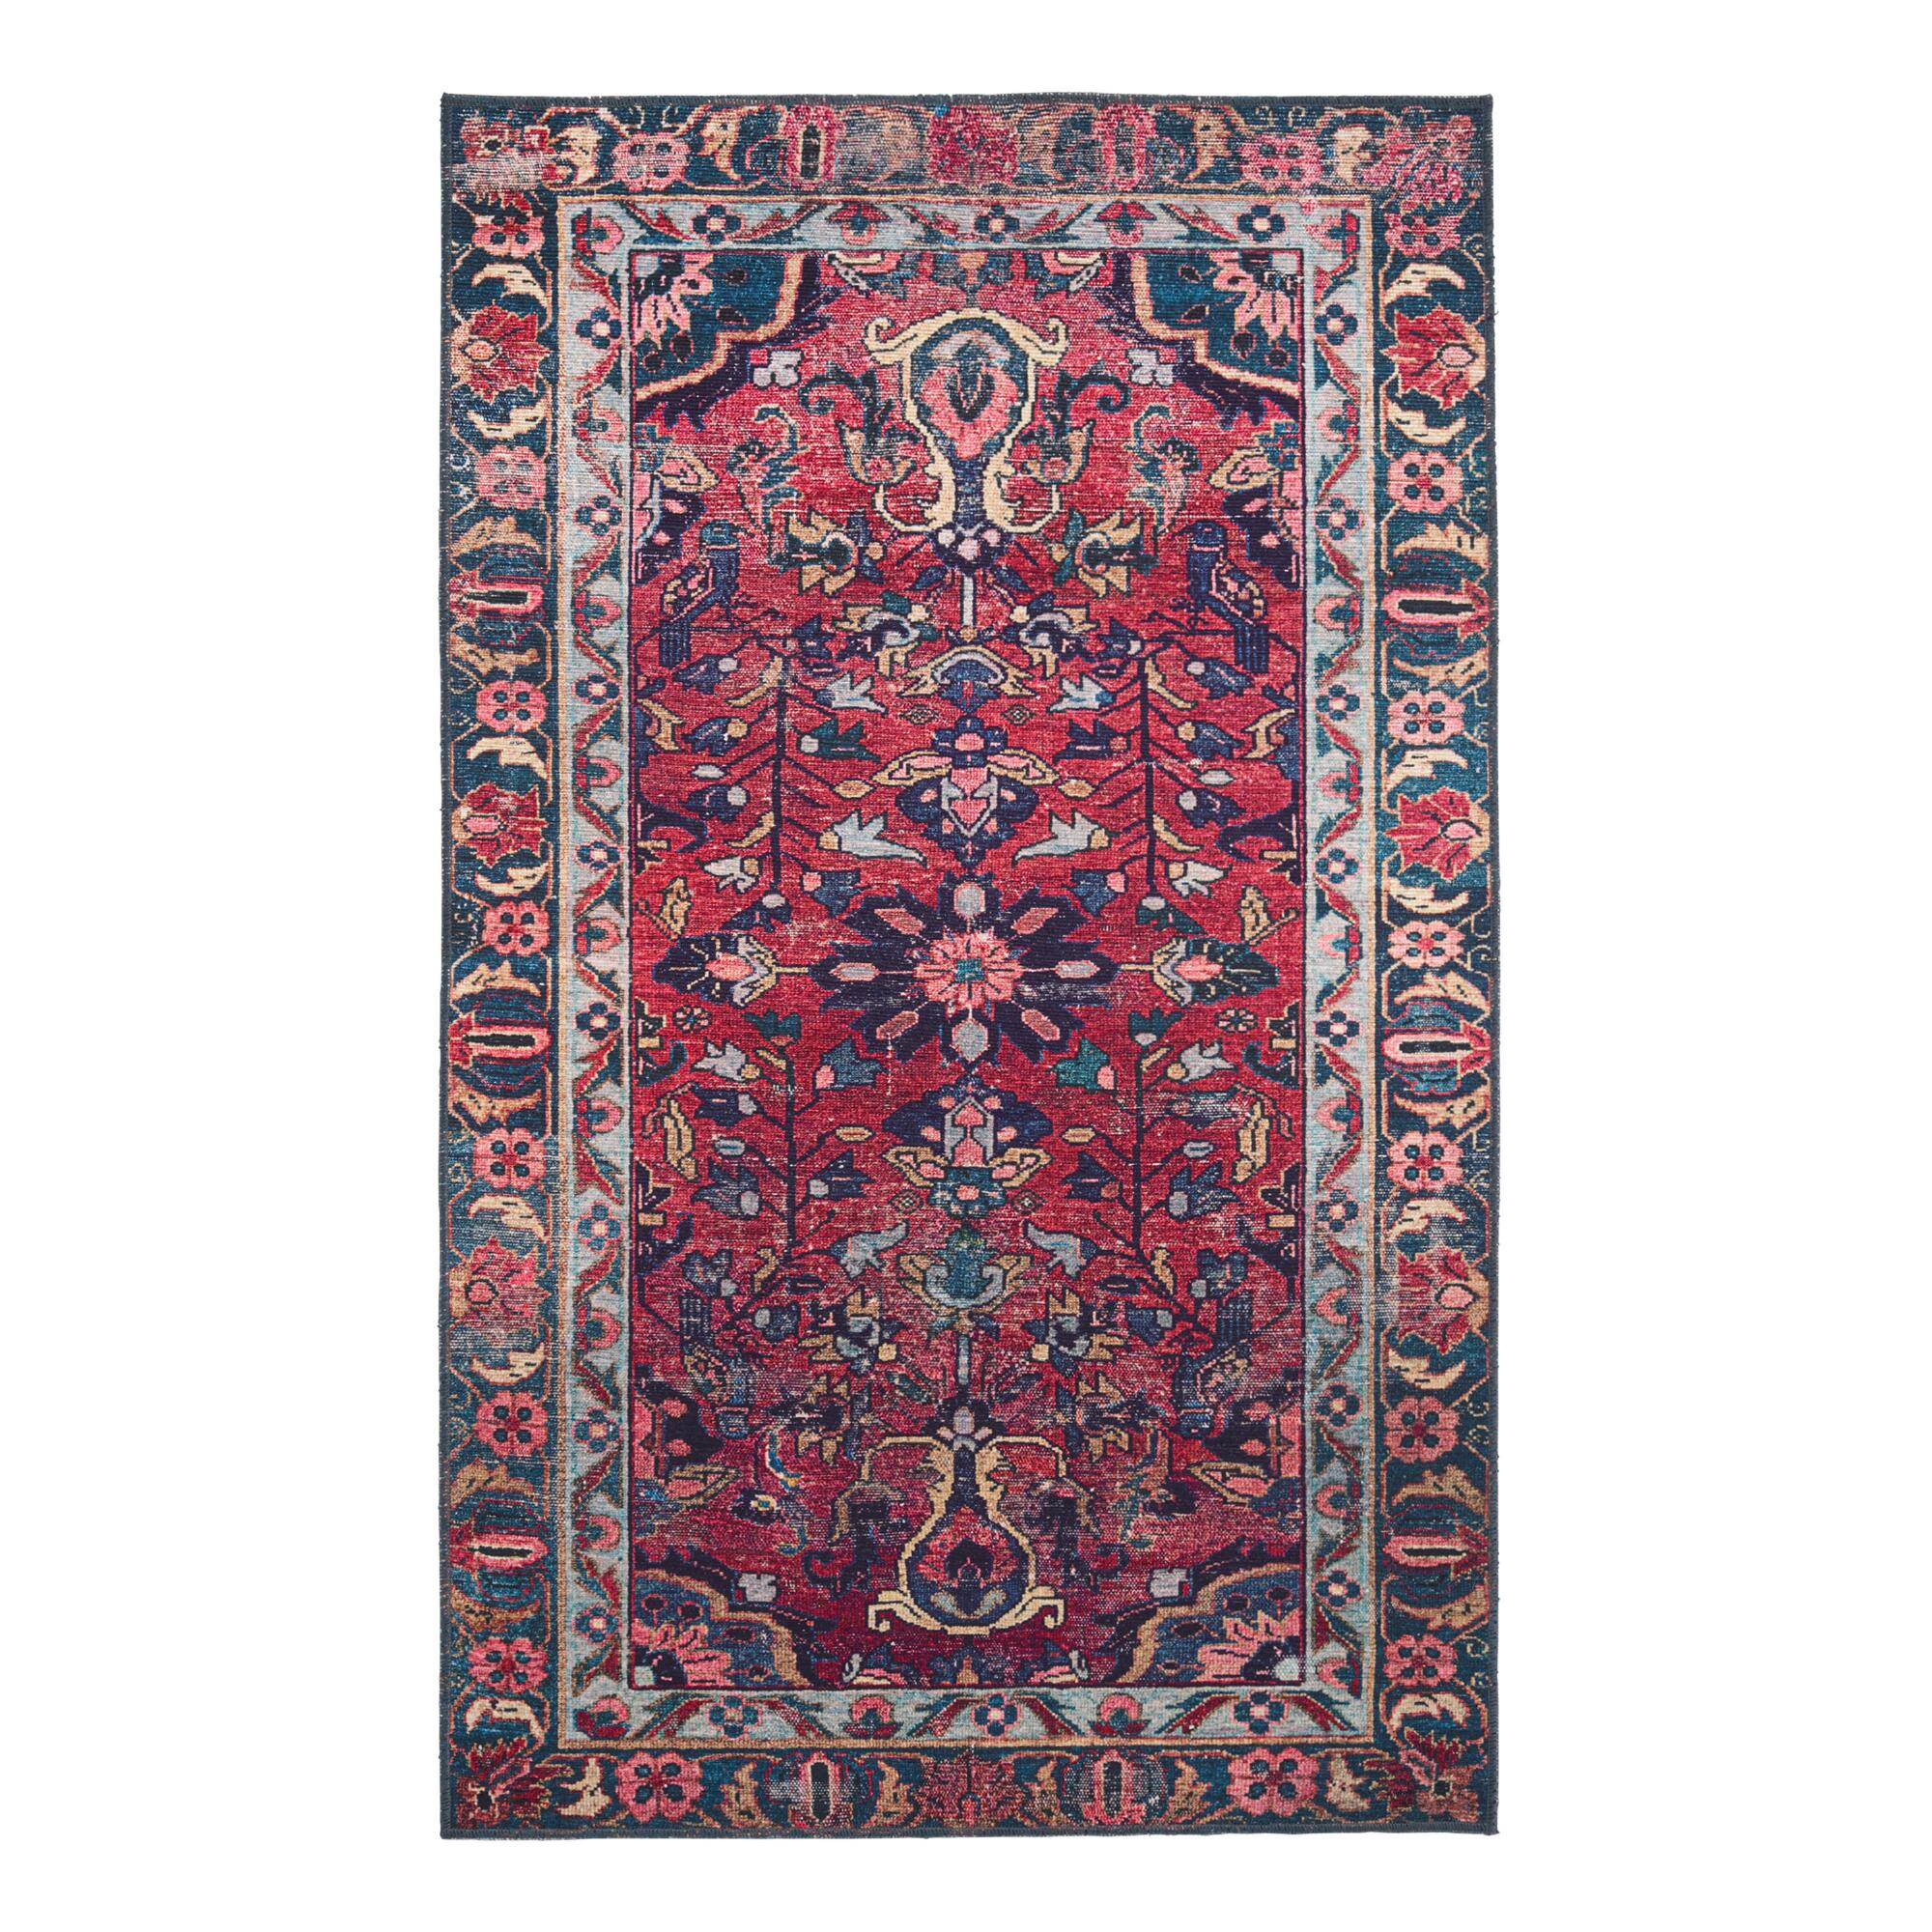 Purple and Rose Persian Style Izmir Area Rug: Red - Polyester - 2' x 3' by World Market